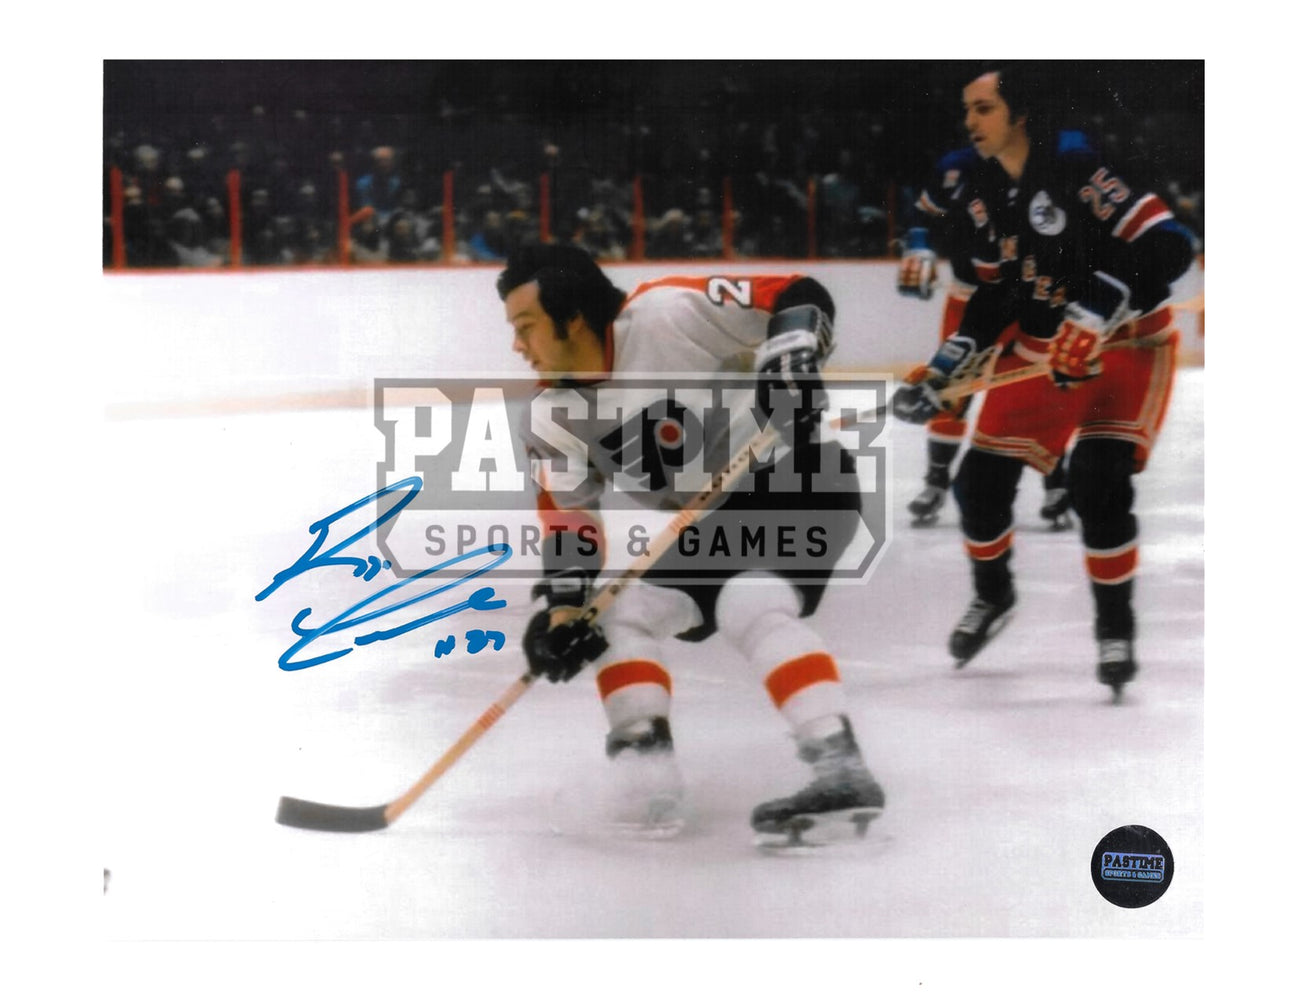 Reggie Leach Autographed 8X10 Philladelphia Flyers Away Jersey (Skating) - Pastime Sports & Games